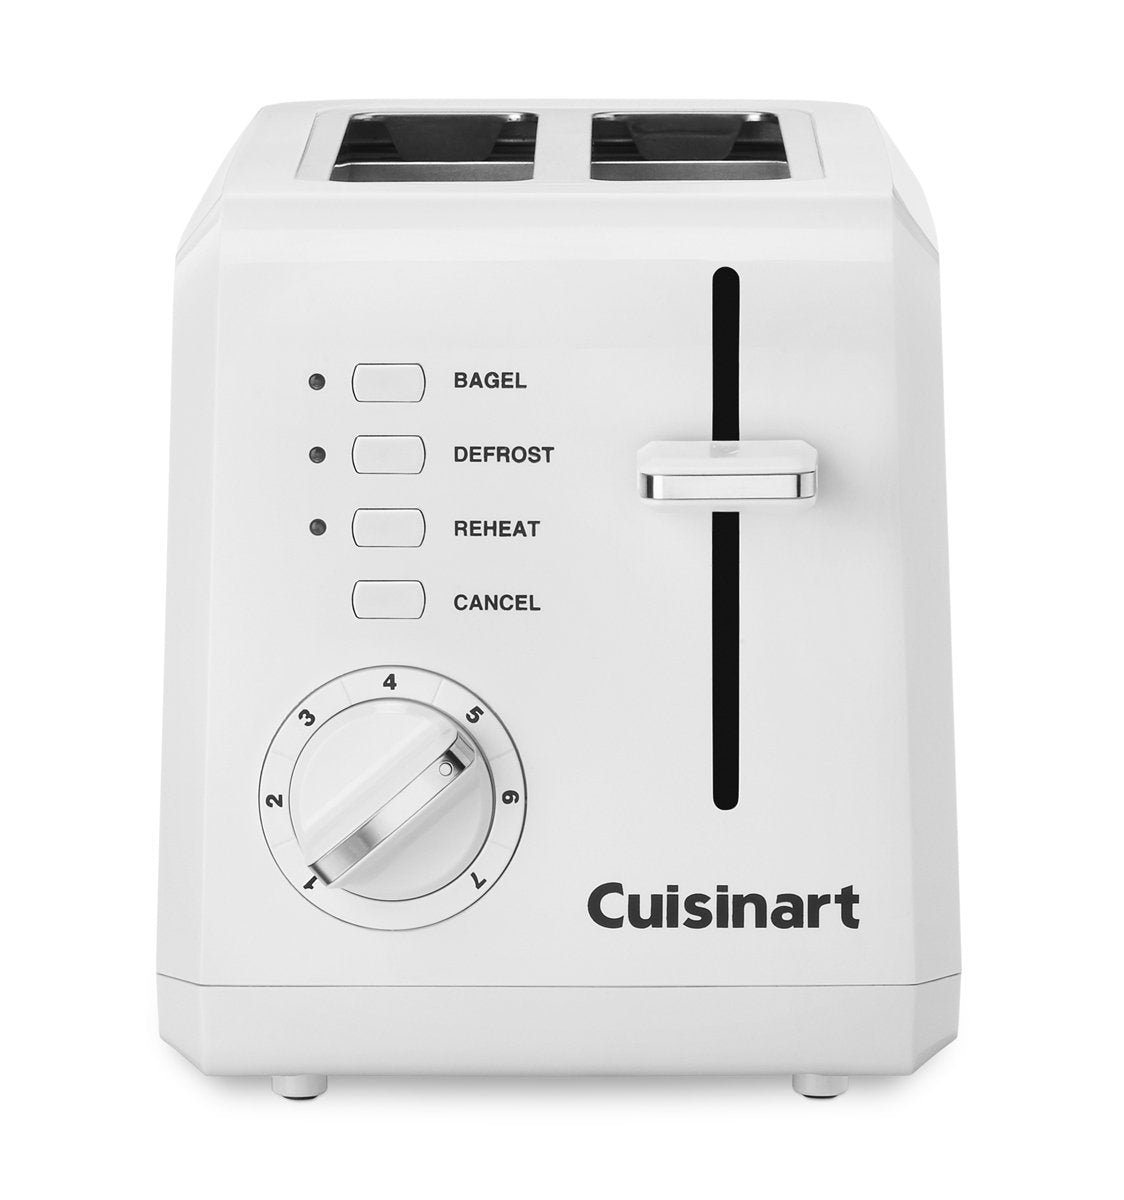 buy toasters at cheap rate in bulk. wholesale & retail small home appliances repair kits store.